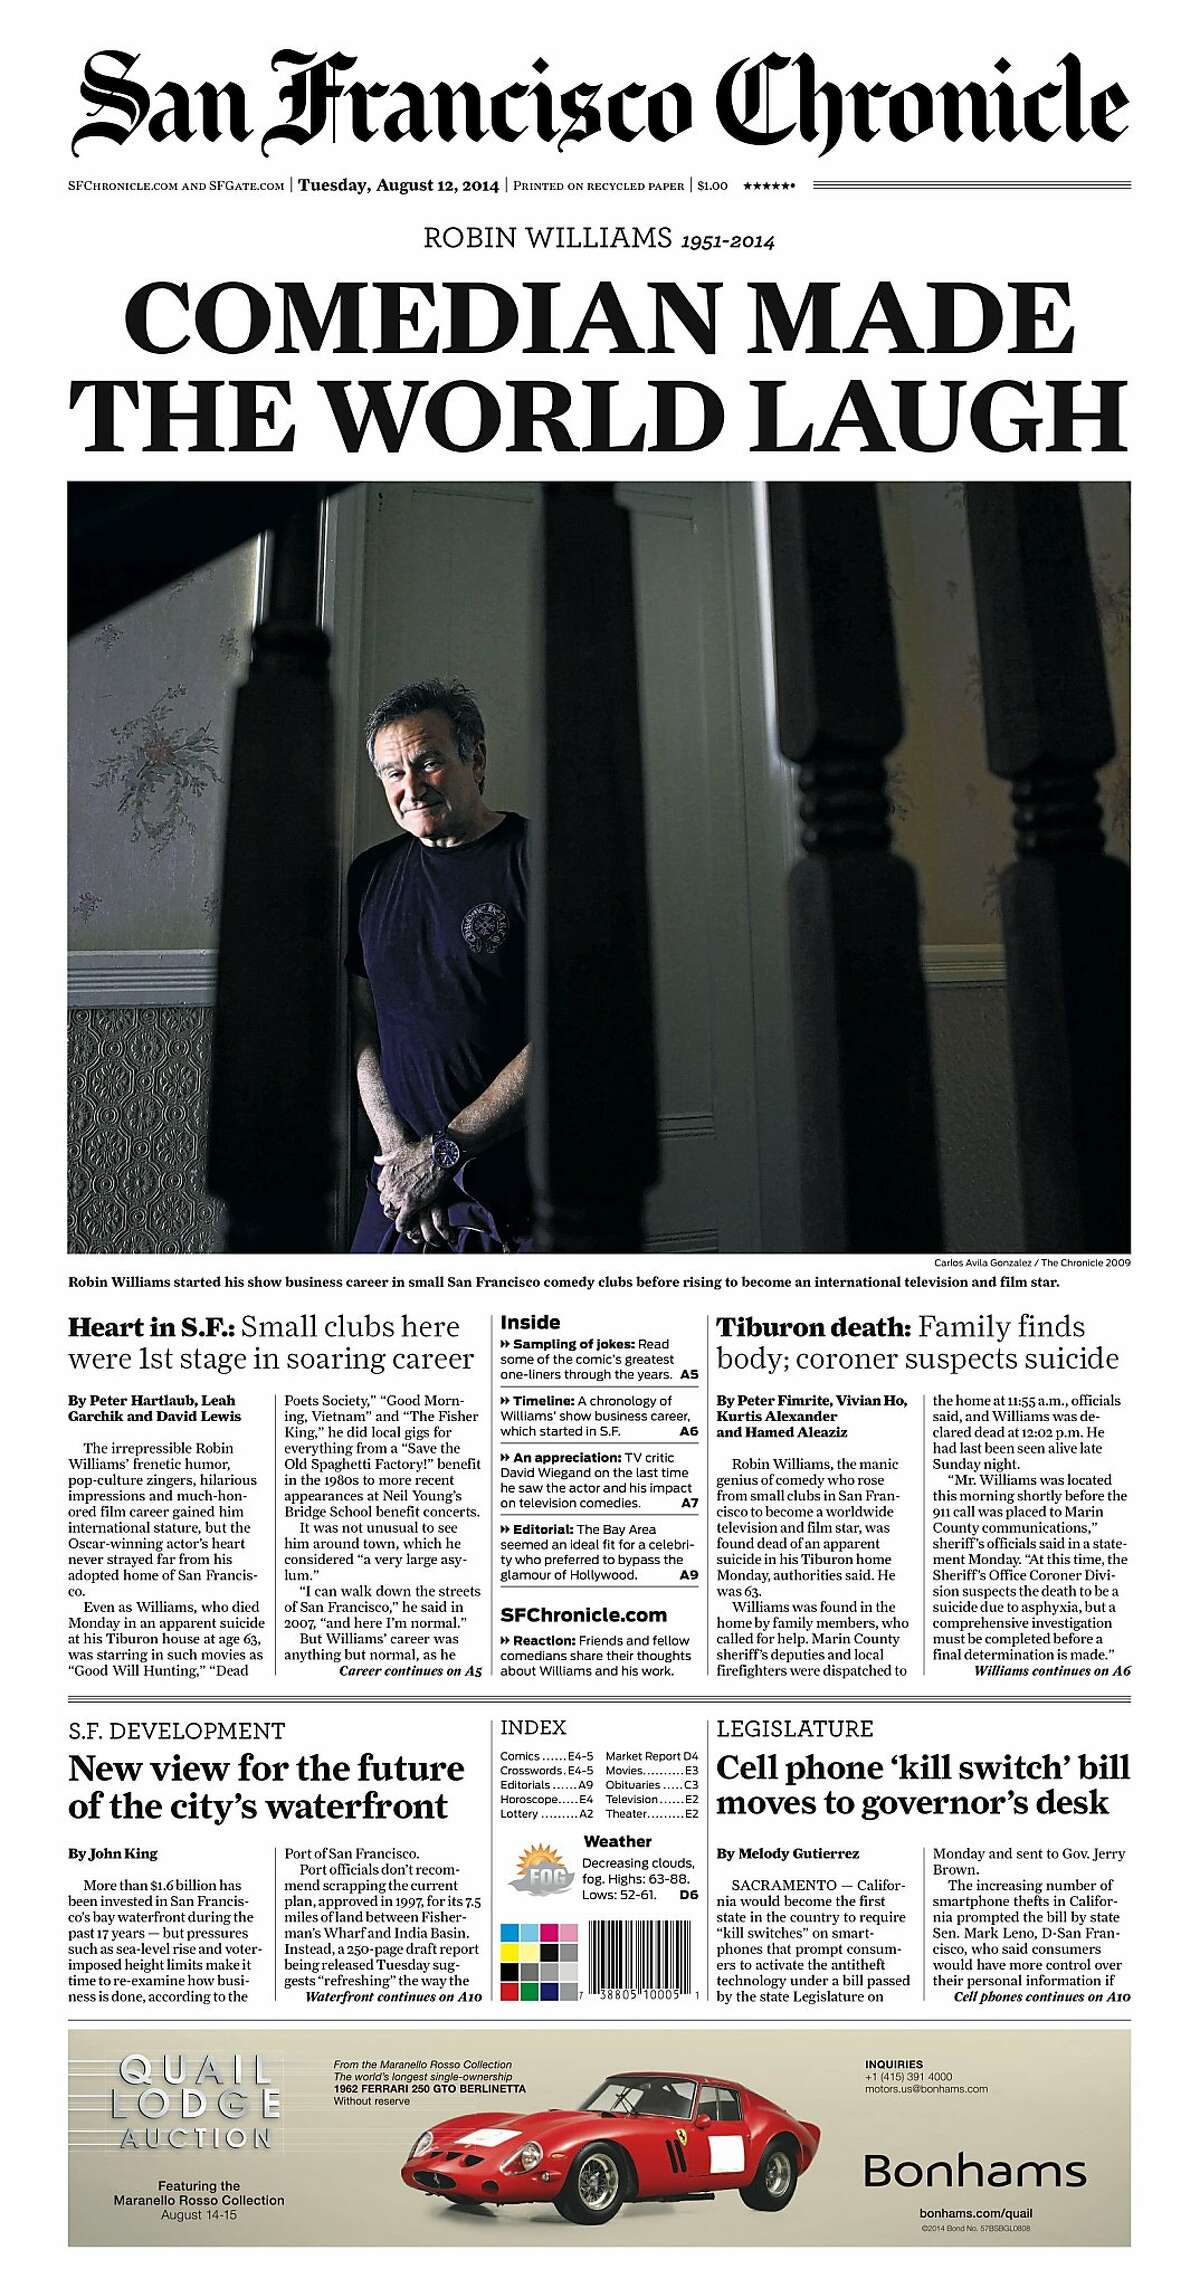 Historic Chronicle Front Page August 12, 2014 Robin Williams dies Chron365, Chroncover